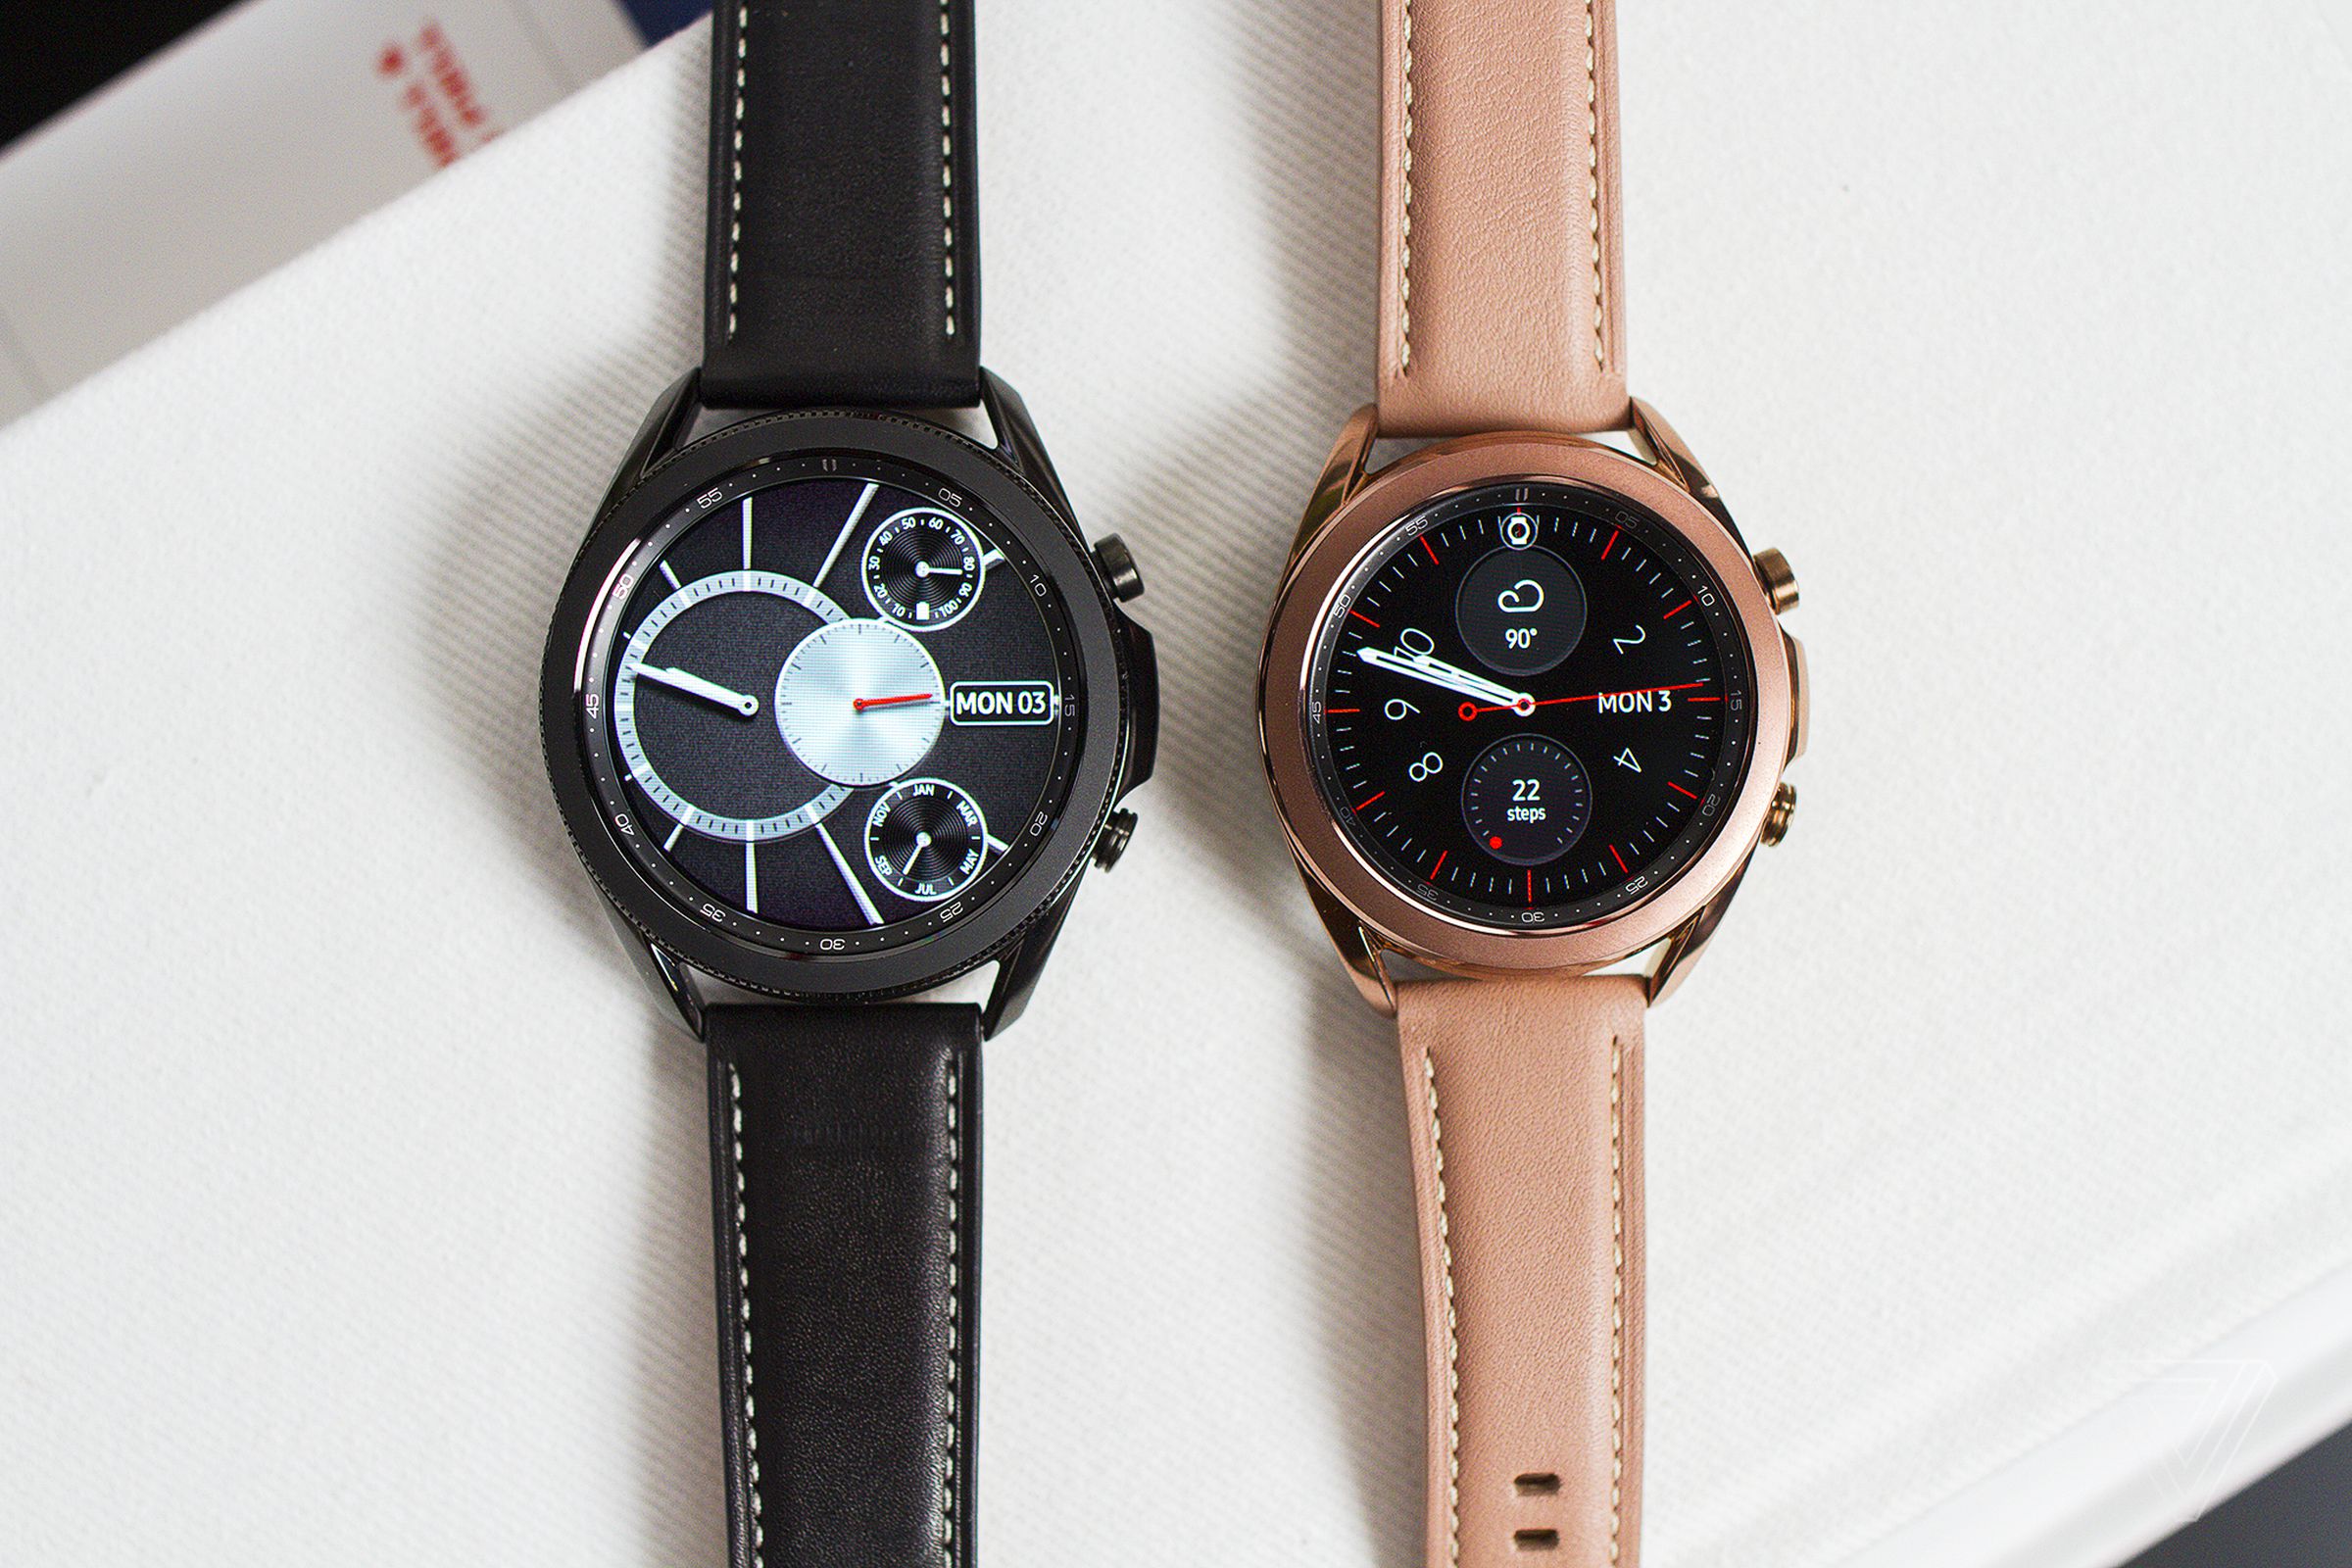 Samsung Galaxy Watch 3 in 45mm and 41mm sizes.